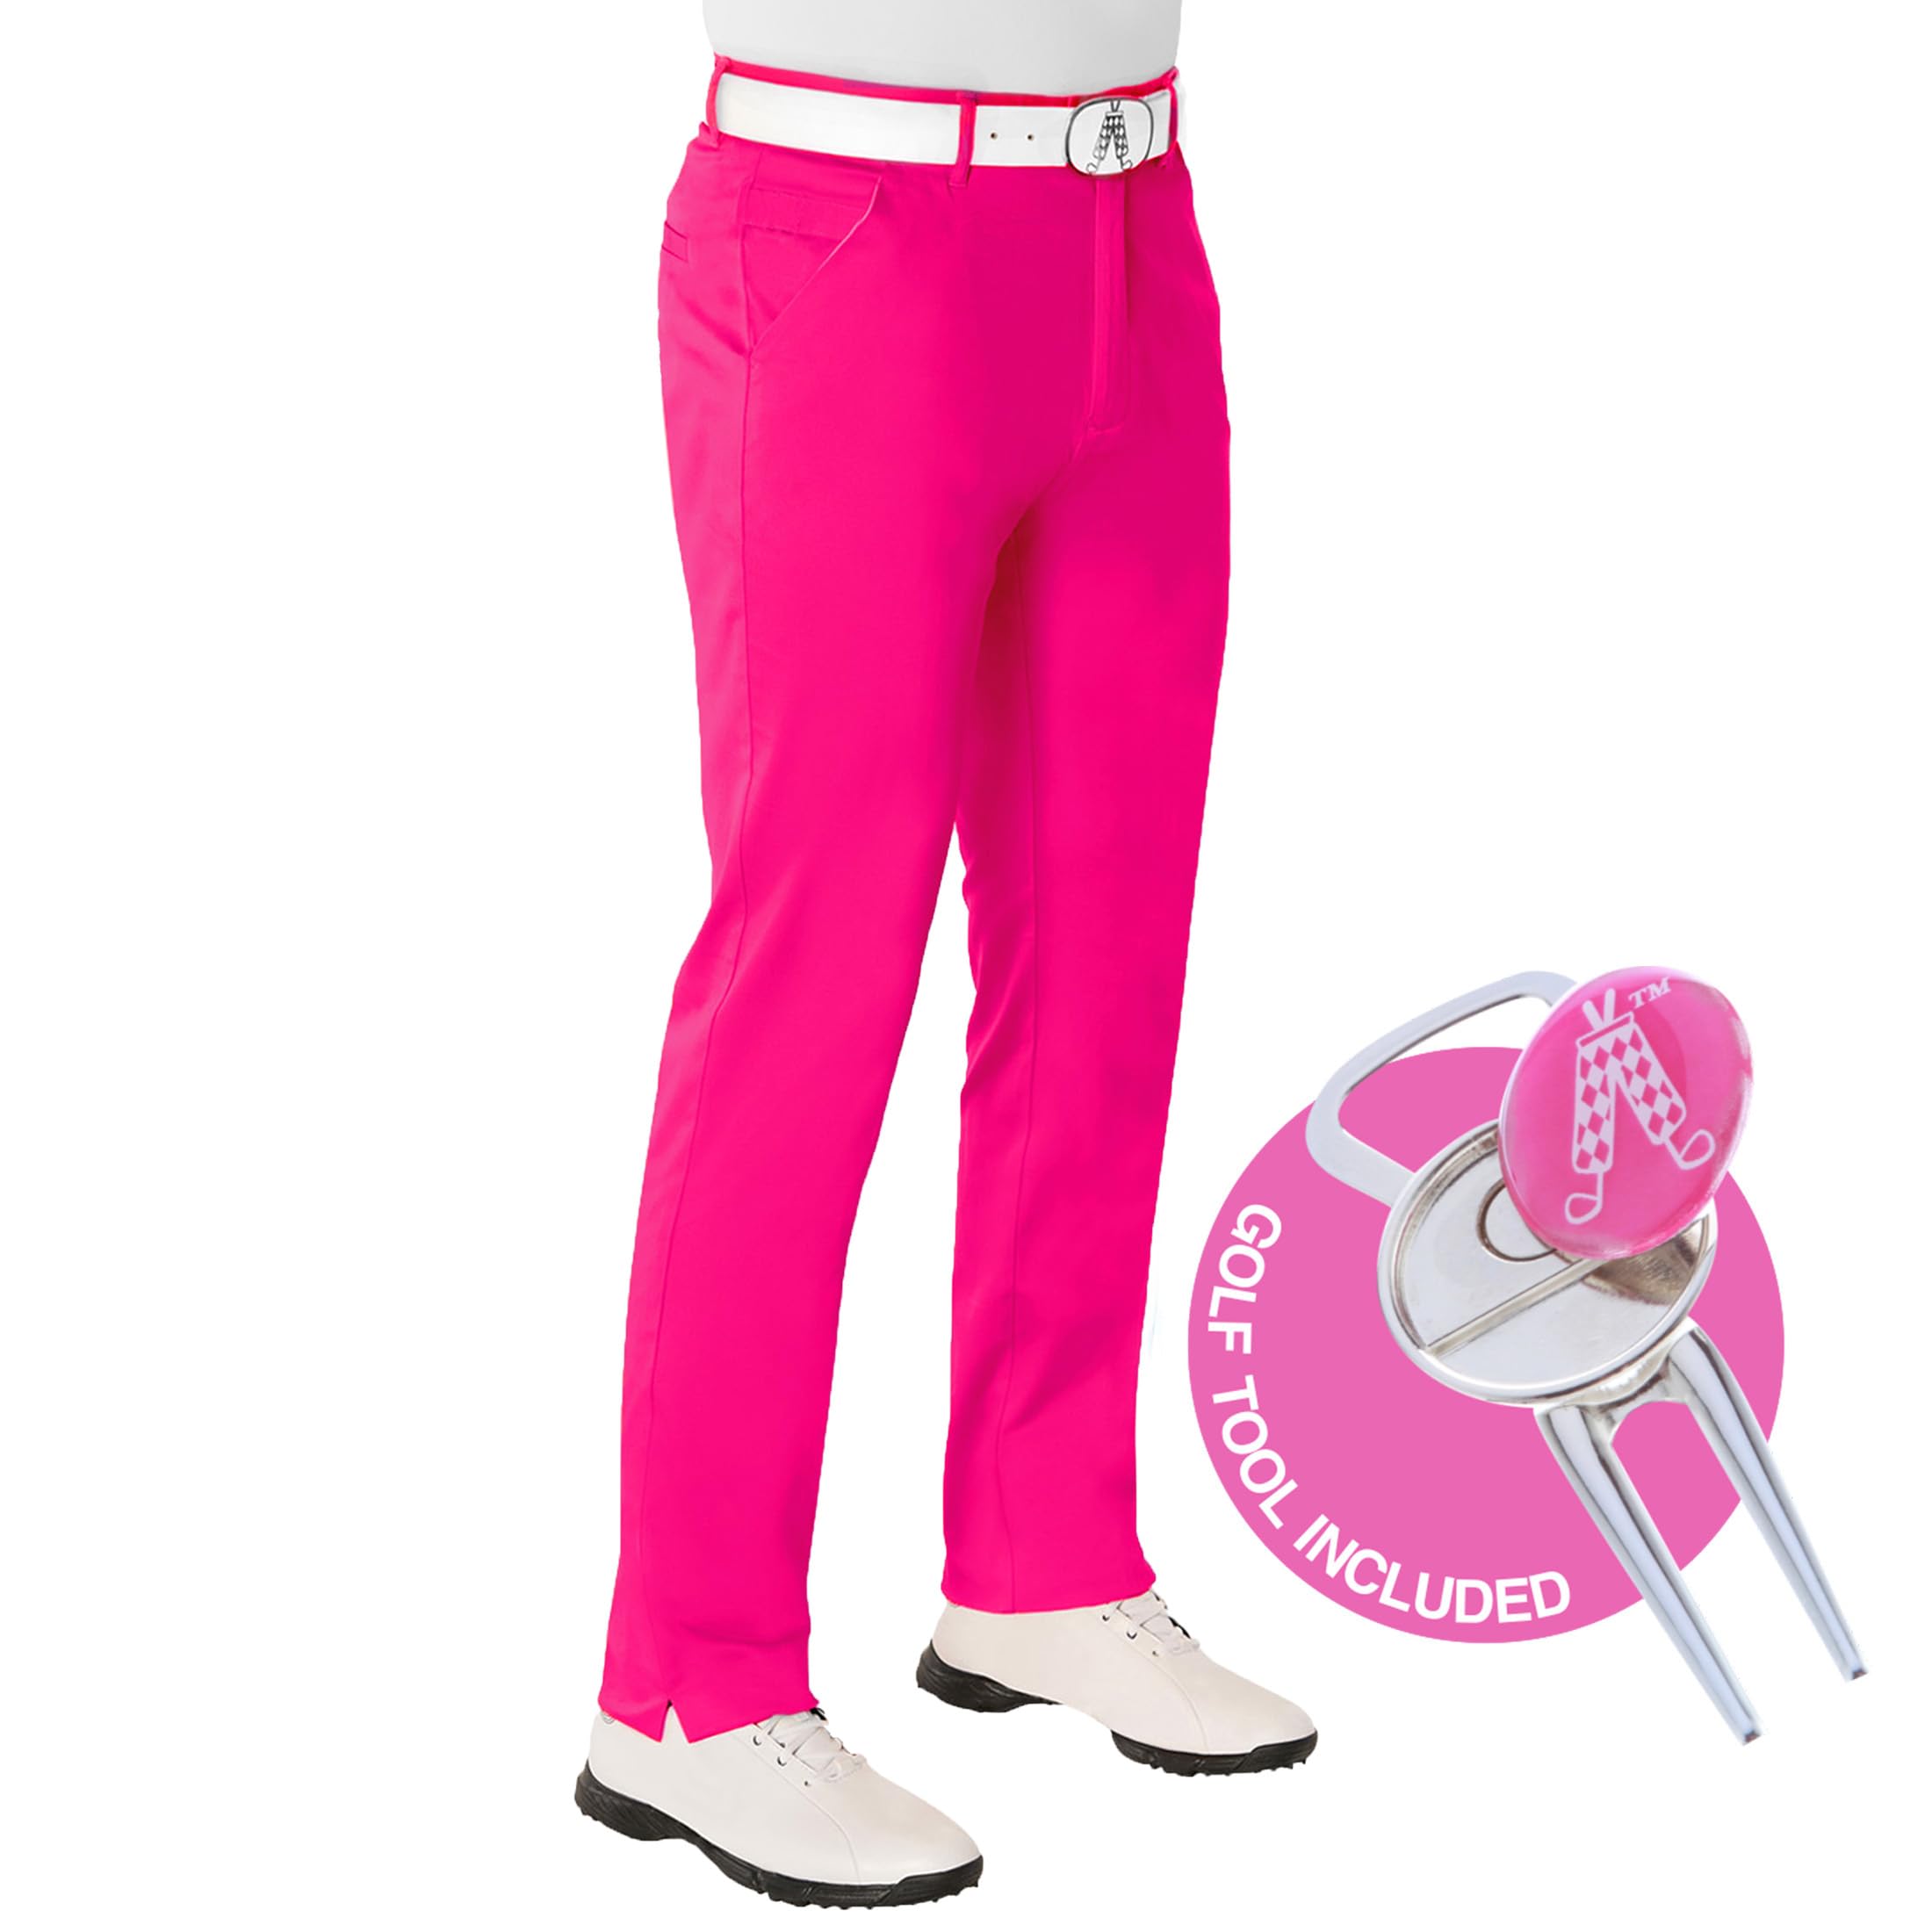 ROYAL & AWESOME HERREN-GOLFHOSE, Rosa (Pink Ticket), W36/L32